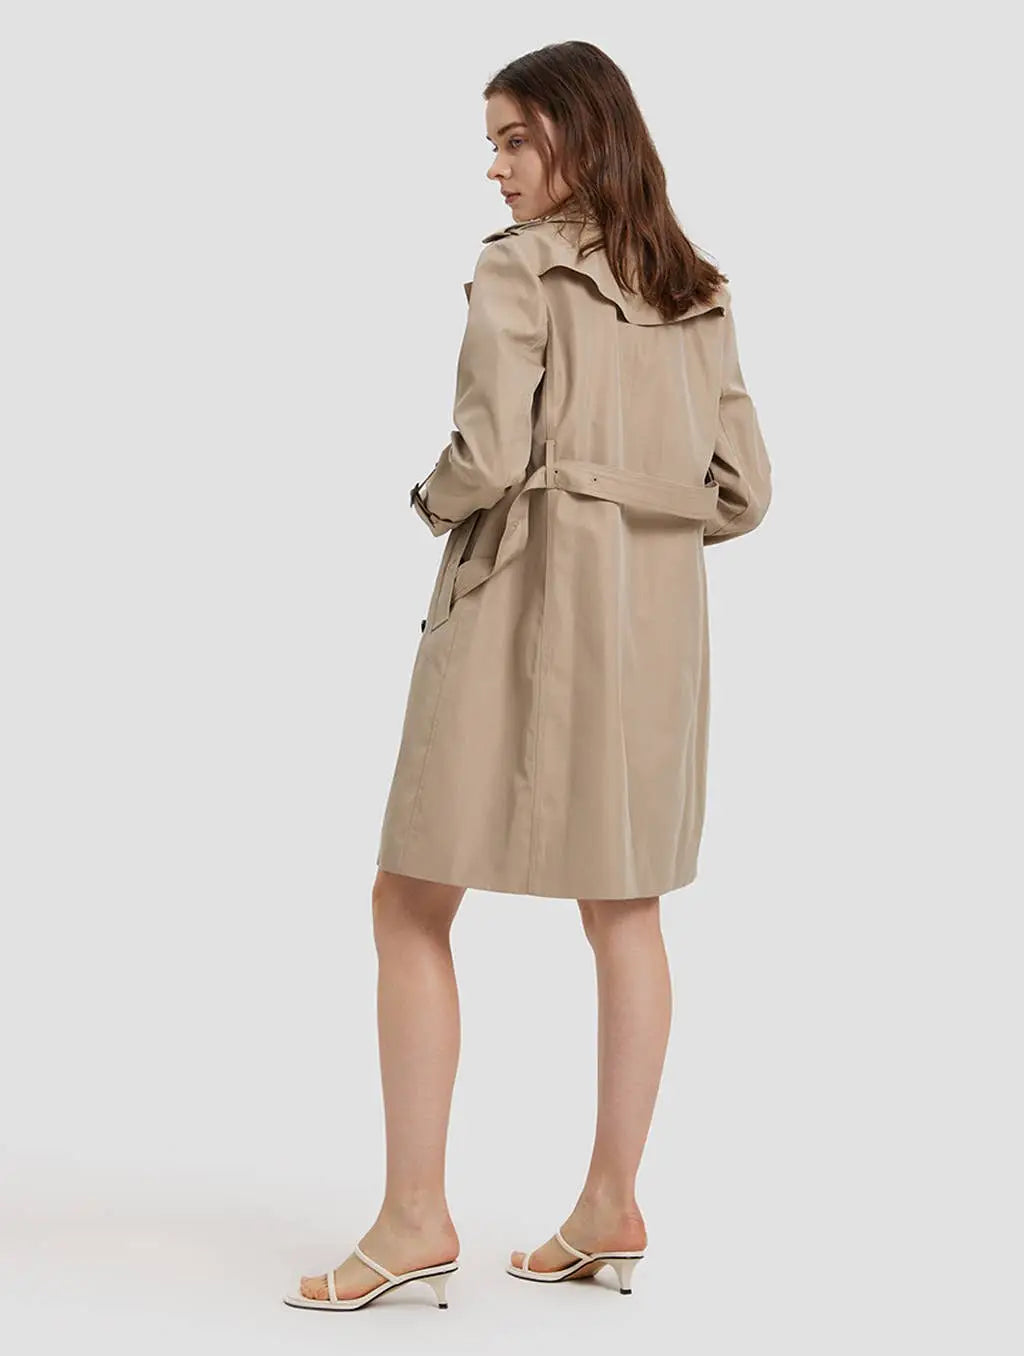 You Need This Trench Coat – Curio by Fifth & Main